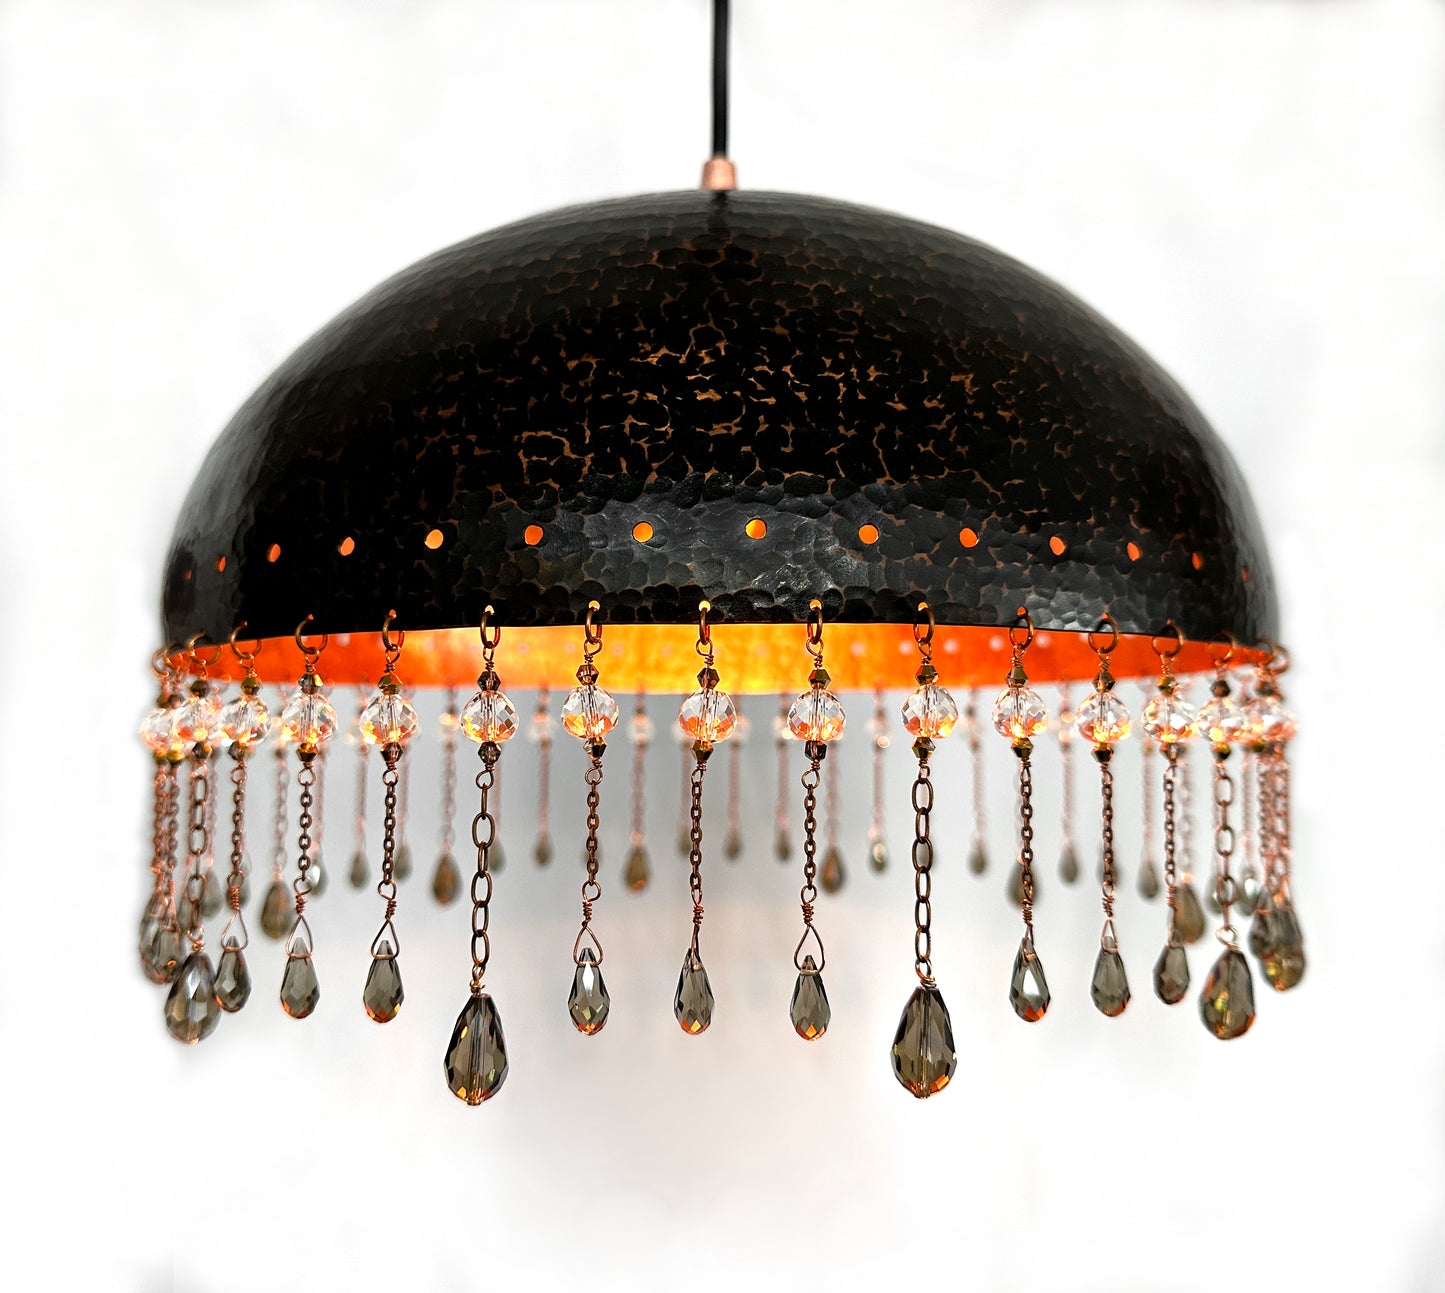 Antique Crackle/Shadow-Casting Crystal Pendant Lamp